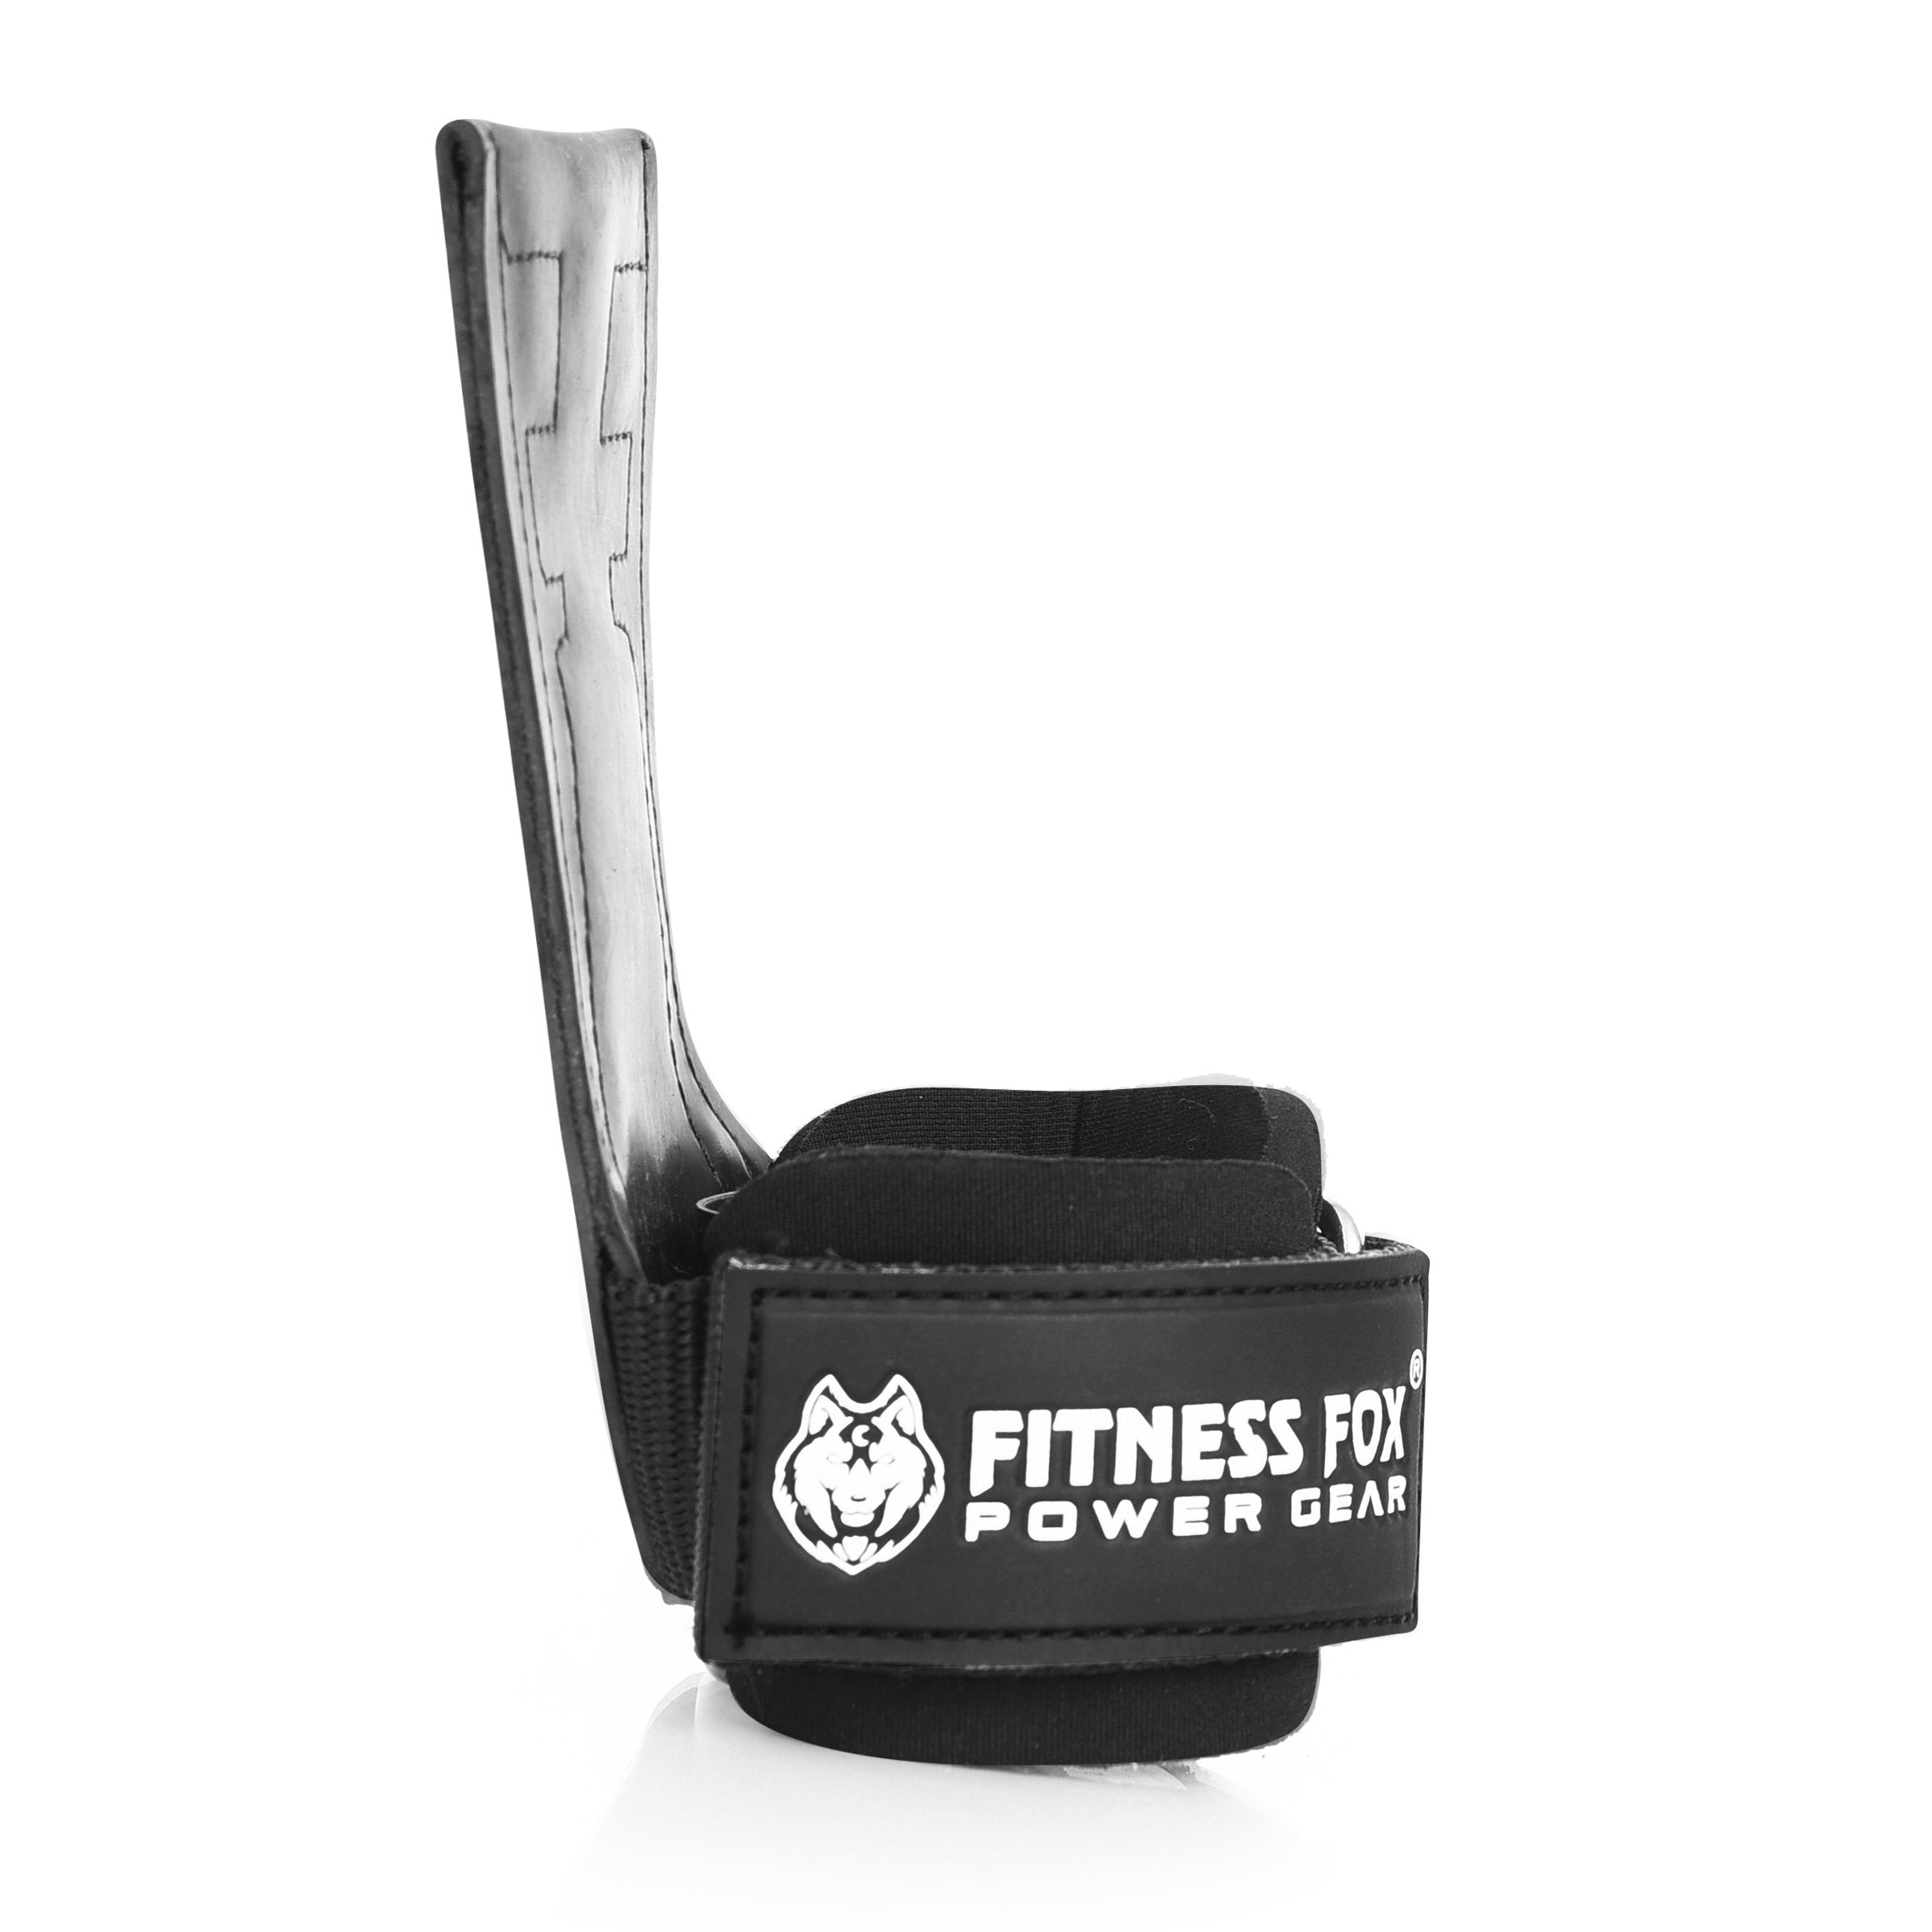 FITNESSFOX Lifting Hand Grips Support Wrist Straps for Heavy Deadlifts